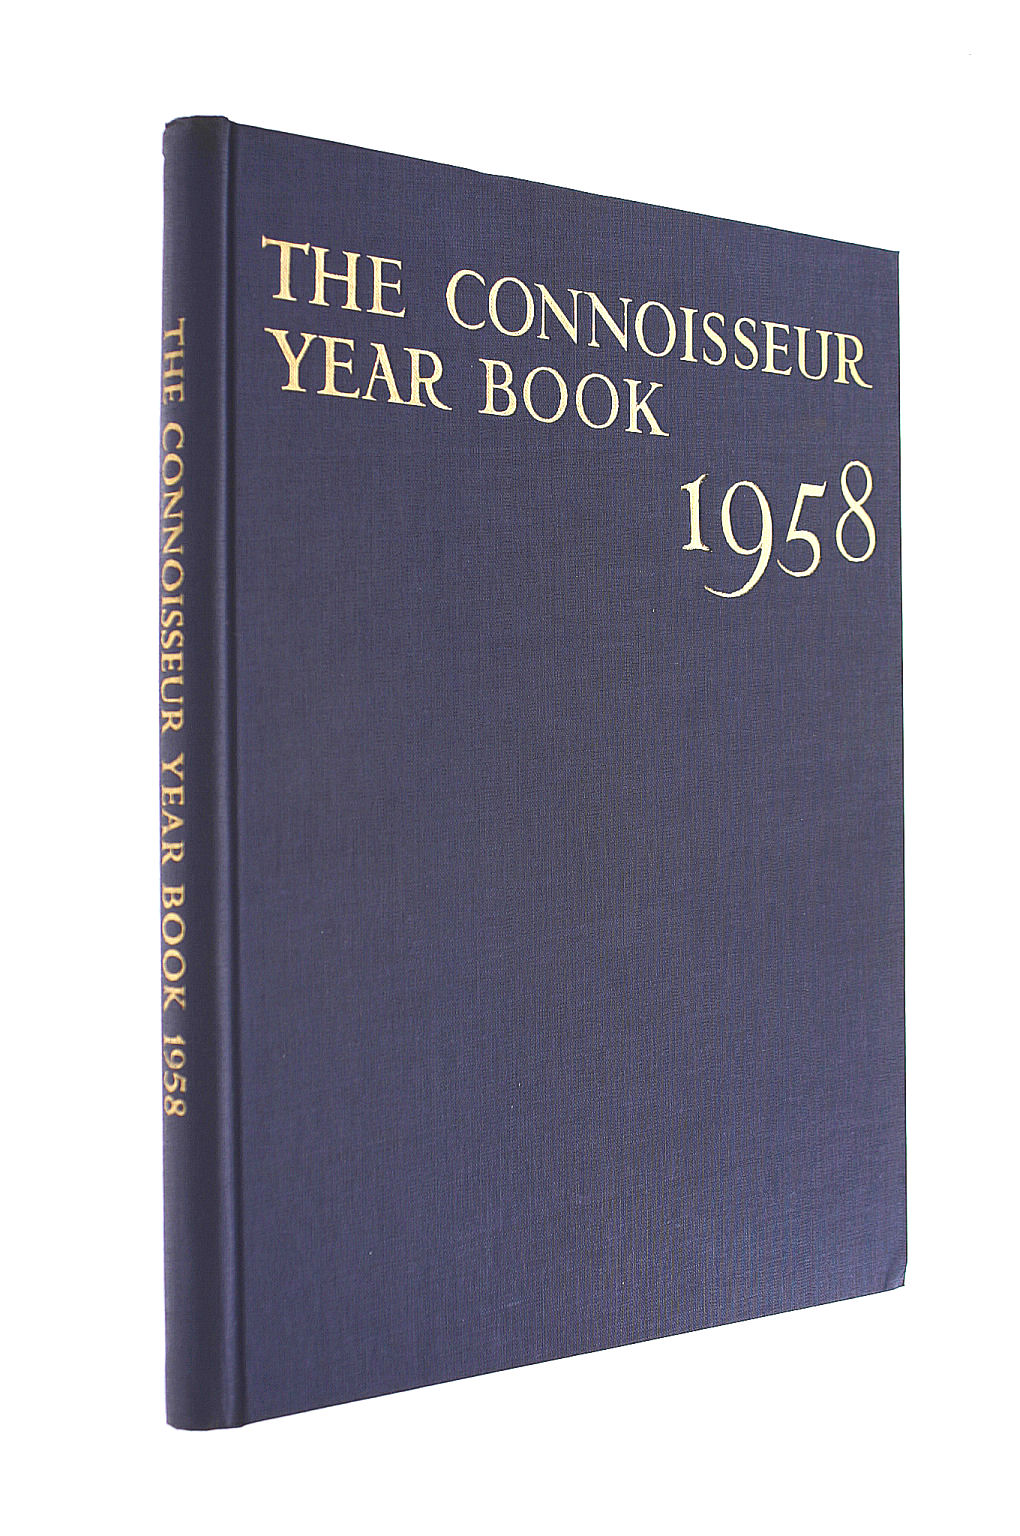 L. G. G. RAMSEY; HELEN COMSTOCK - The Connoisseur Year Book 1958